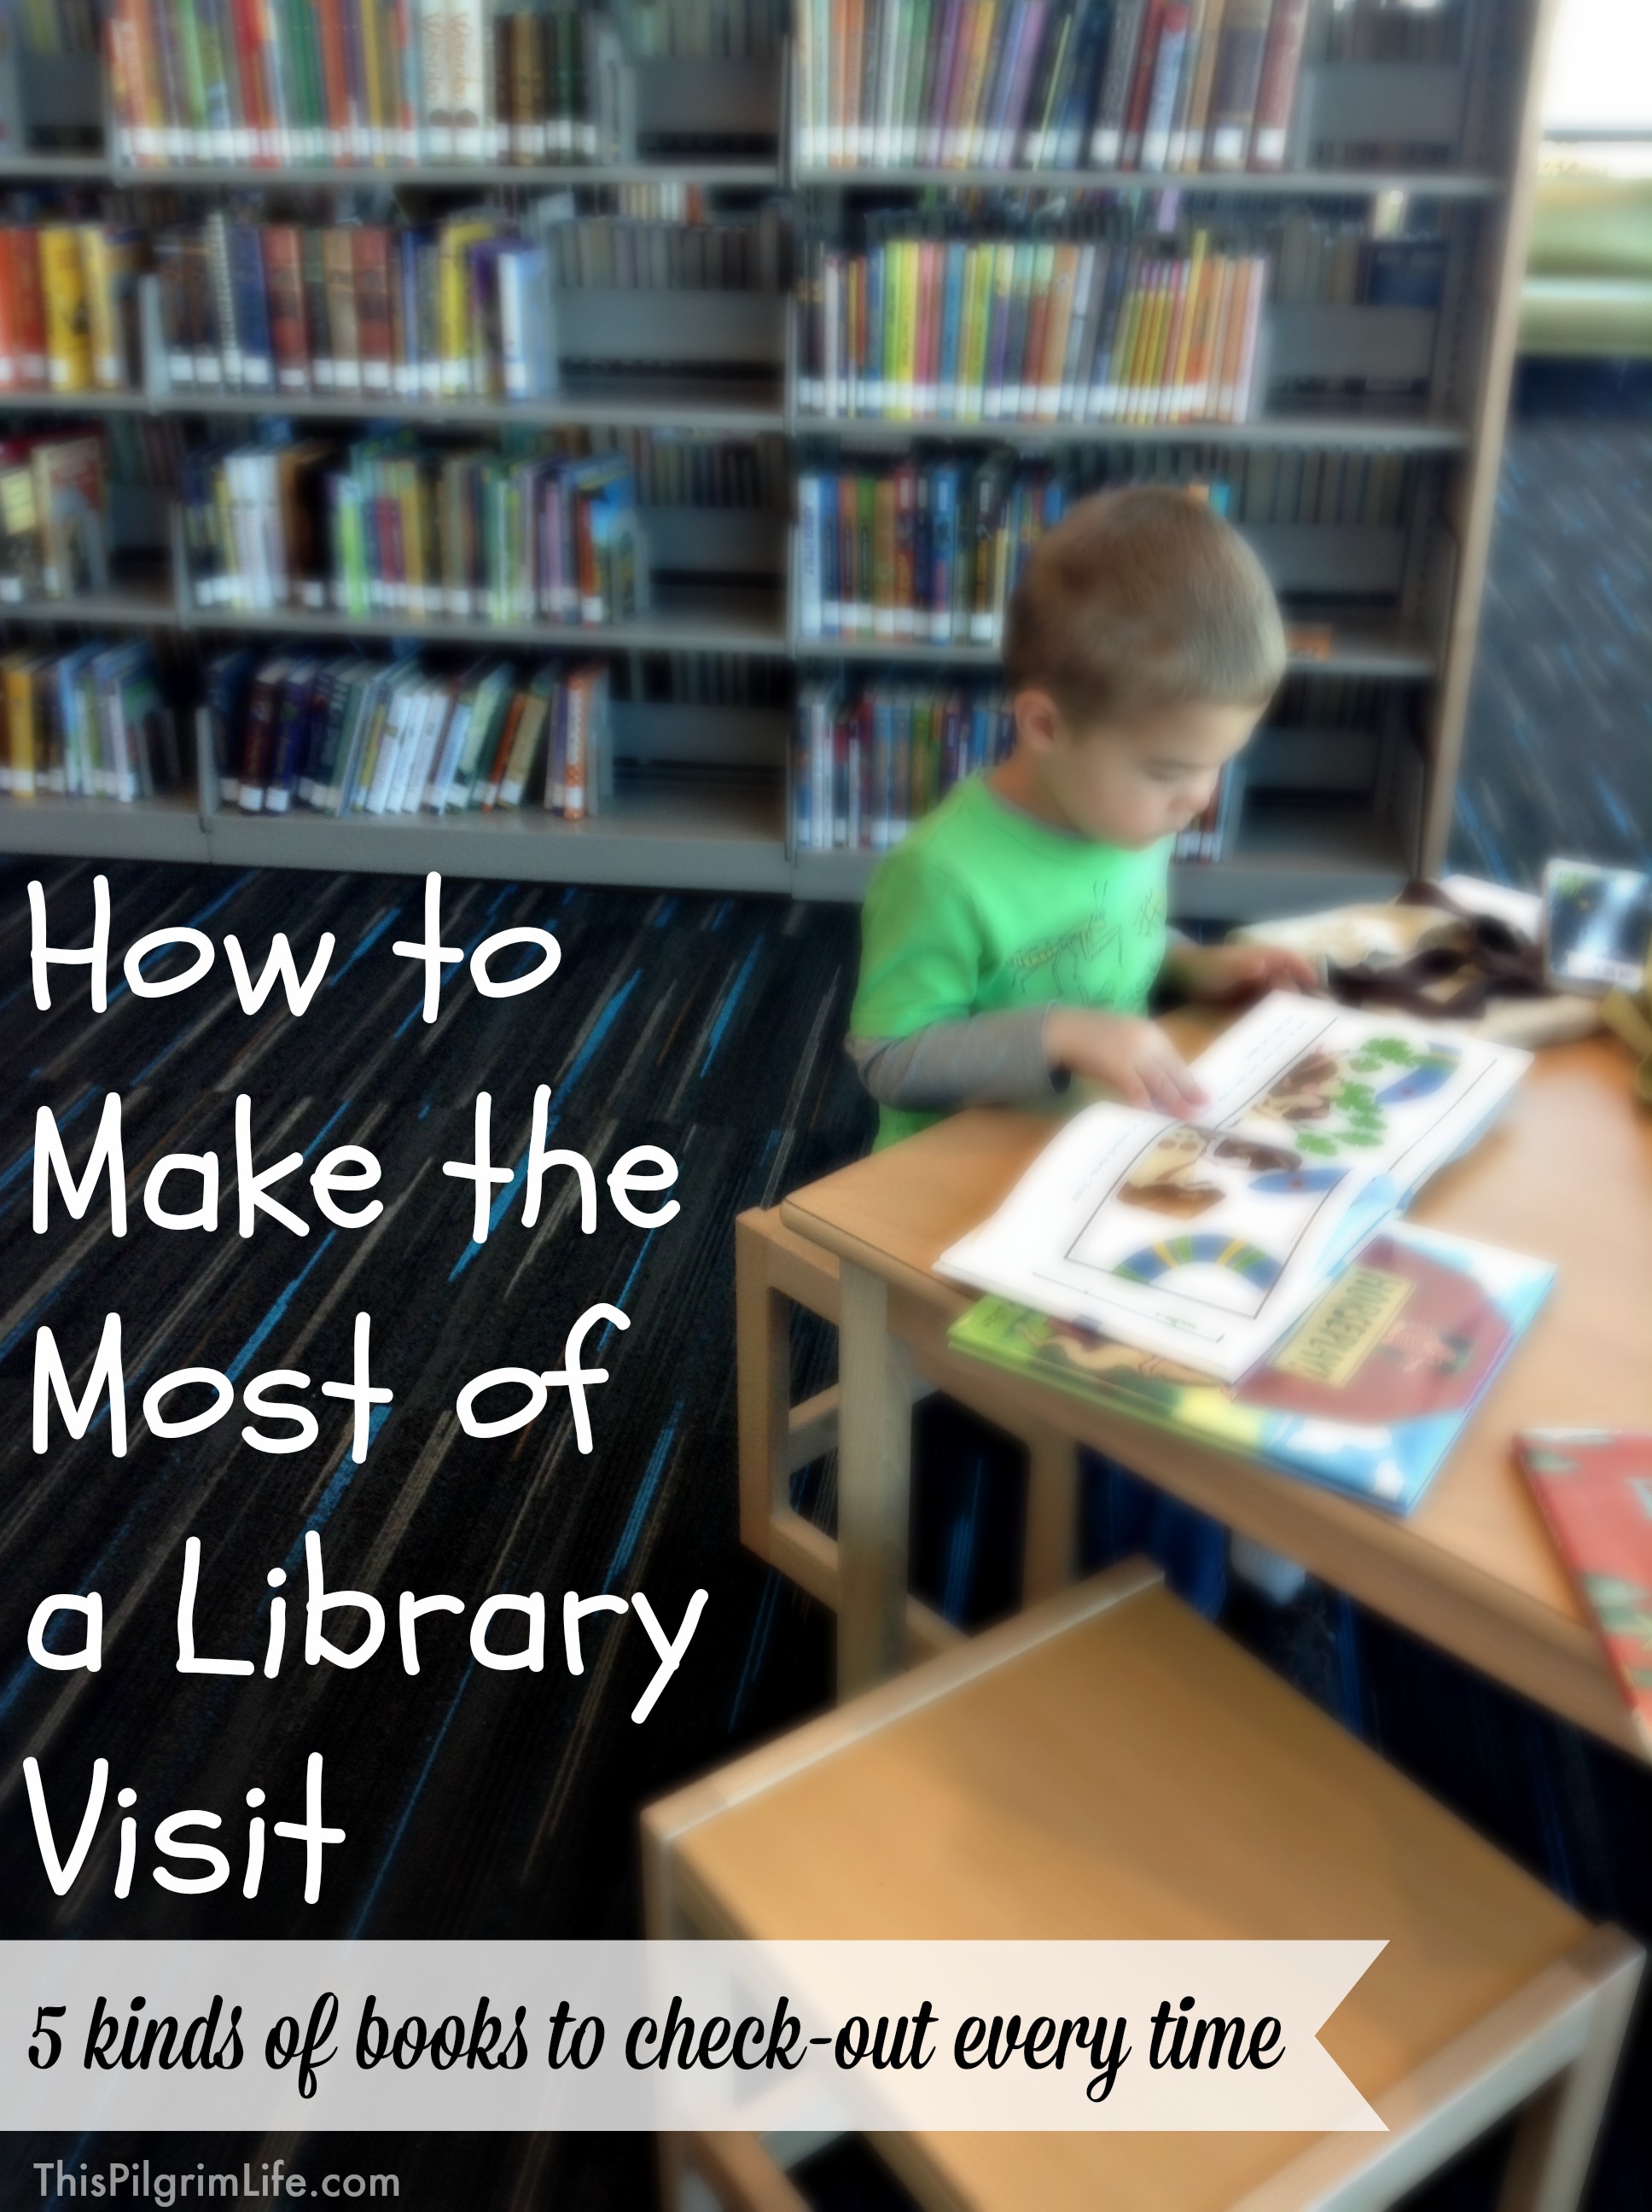 How to Make the Most of a Library Visit: 5 Kinds of Books to Check Out Every Time